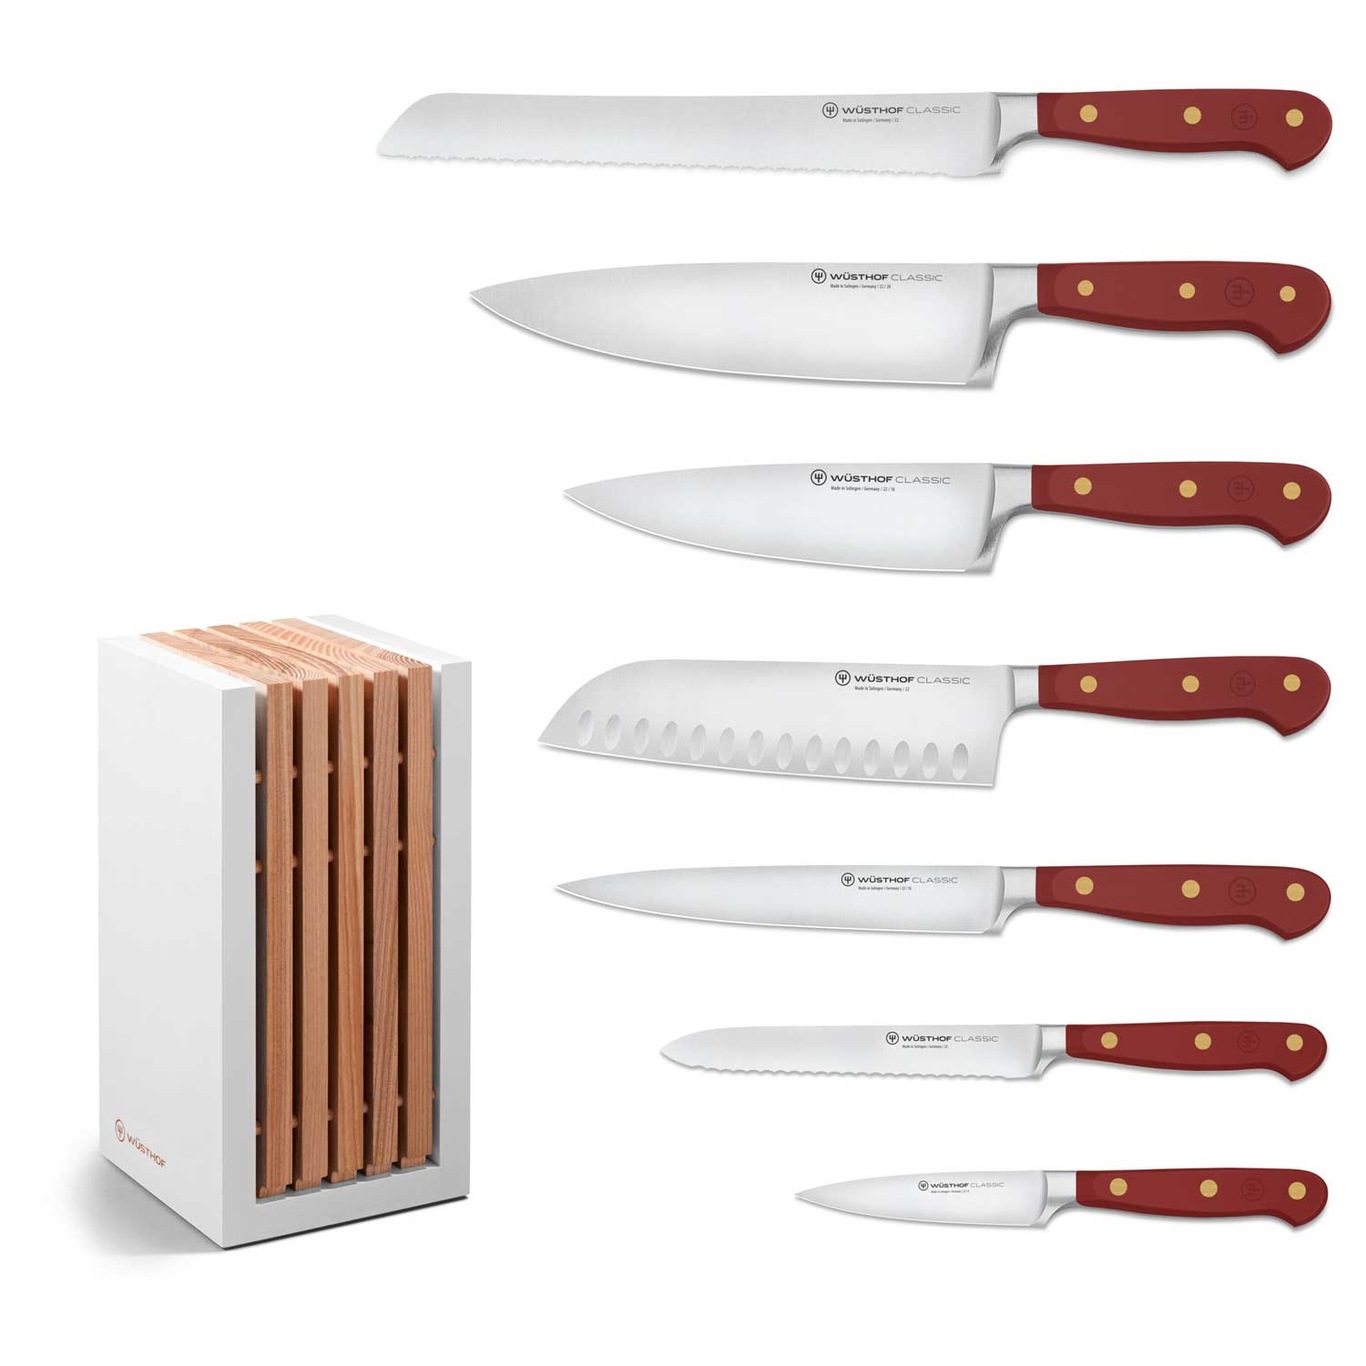 Classic Colour Knife Set With Knife Block 8 Pieces, Tasty Sumac